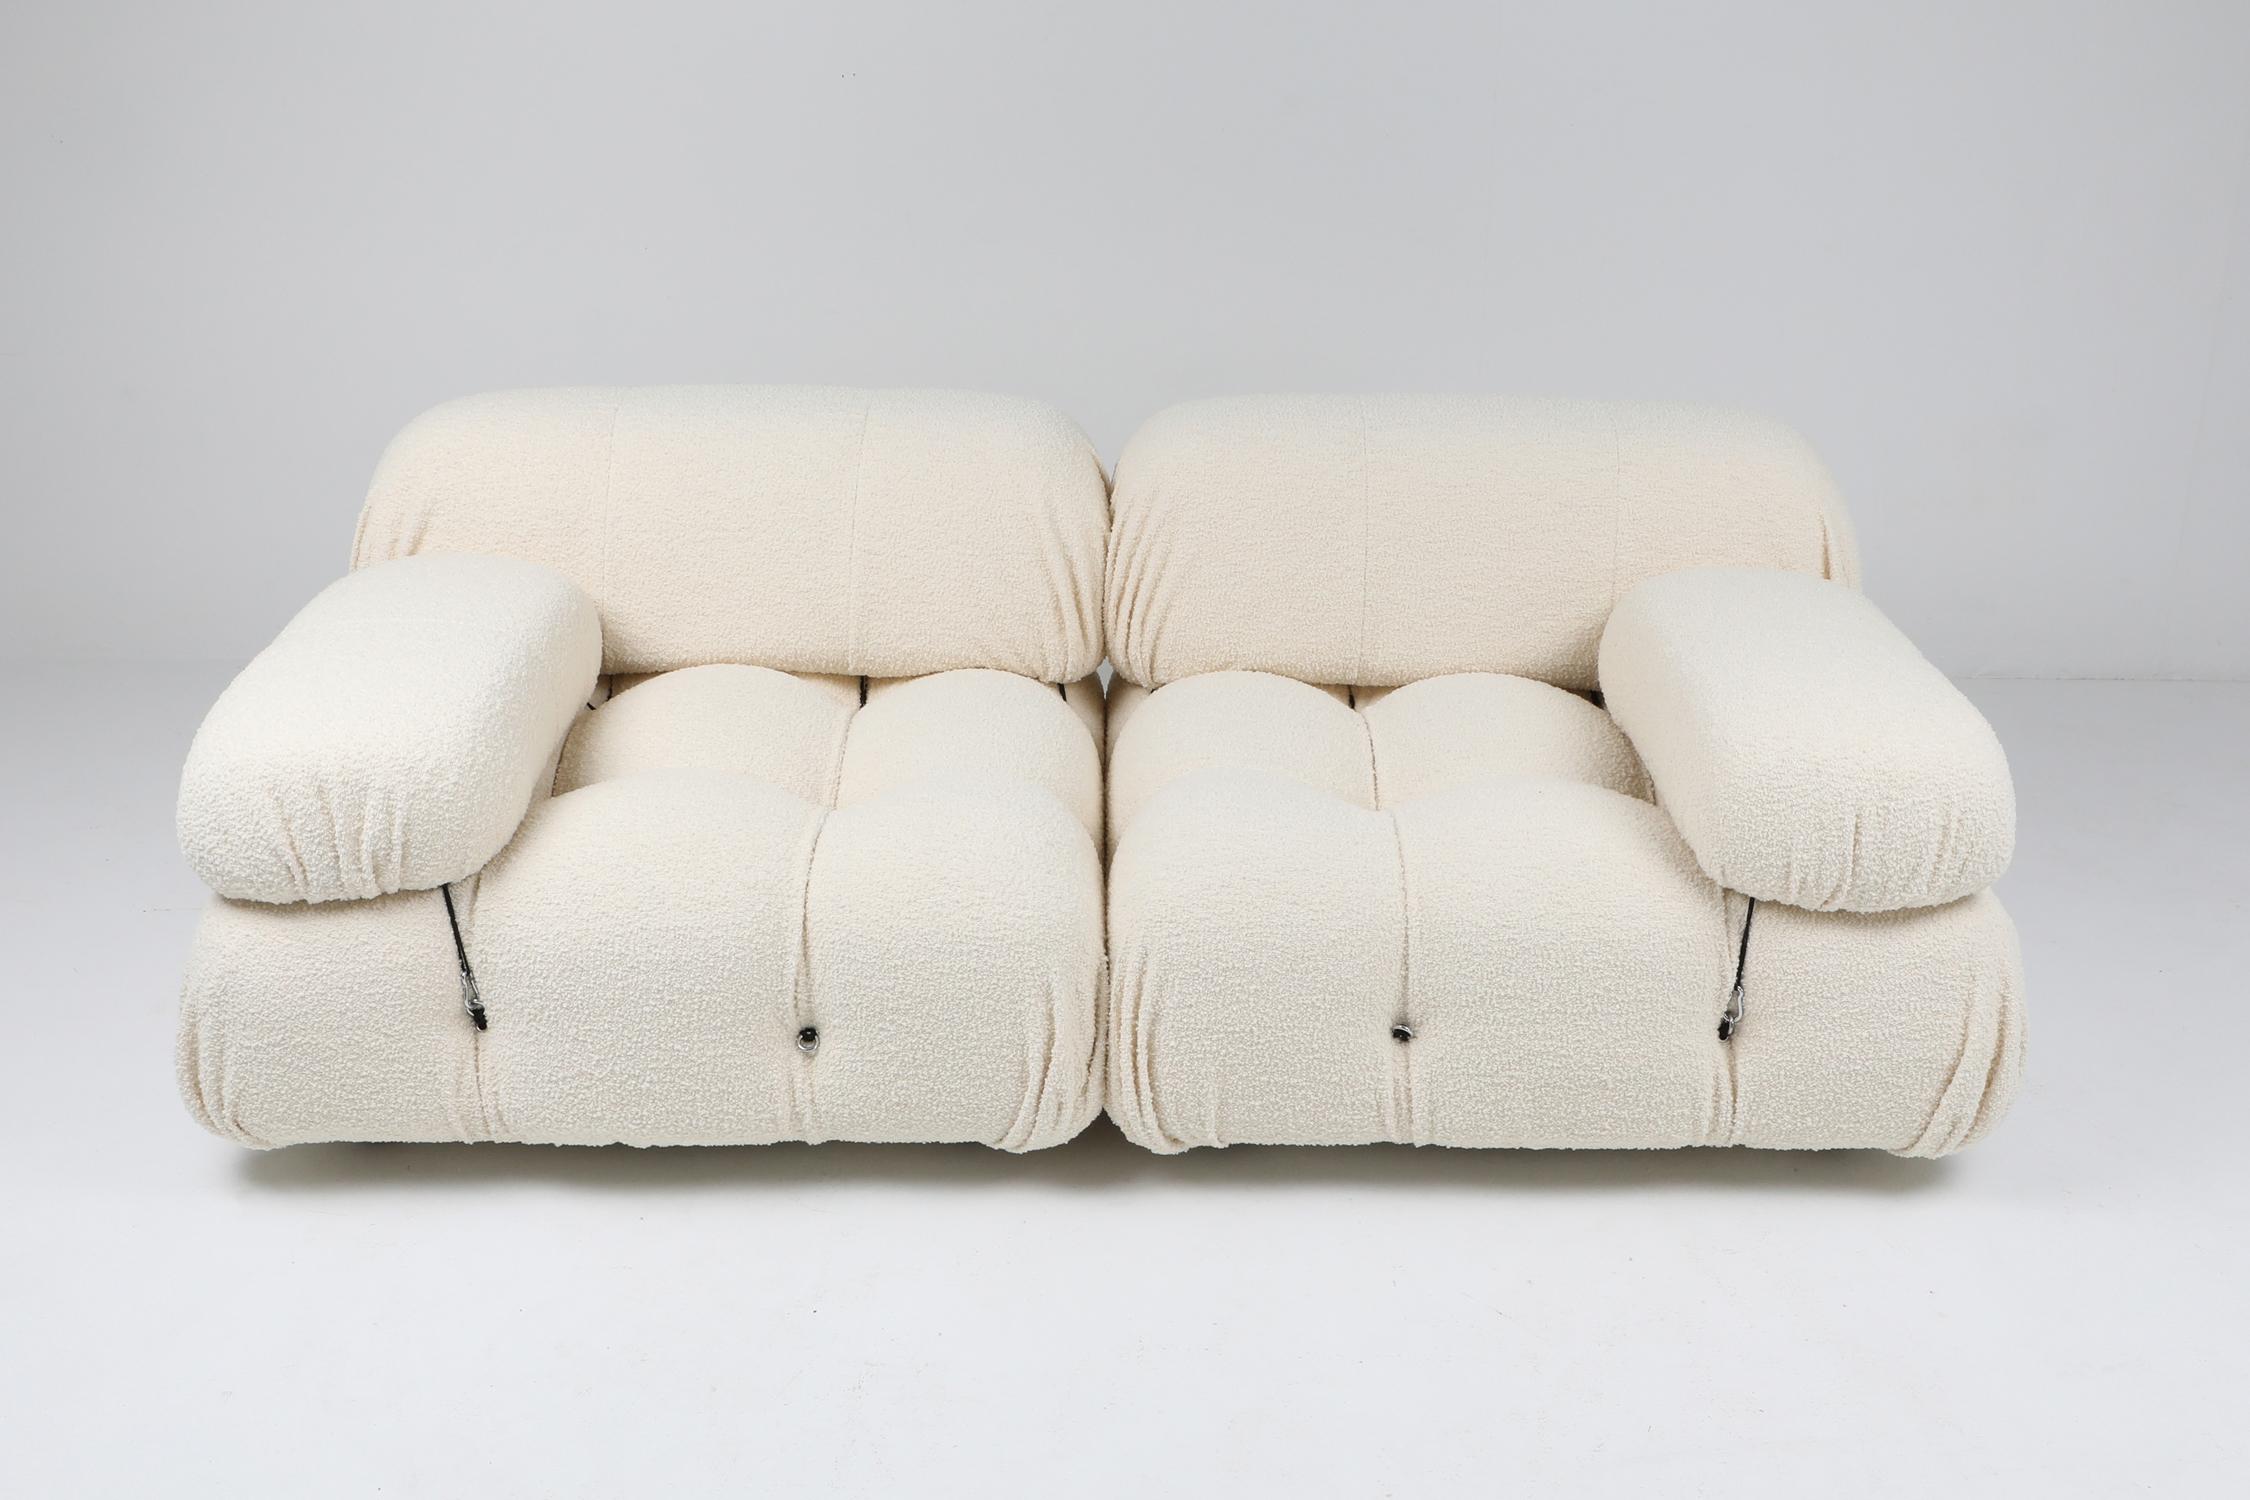 Mario Bellini, 'Cameleonda' sectional sofa in bouclé wool, Italy, 1972.

Re-upholstered Camaleonda piece by Mario Bellini.
The listing includes two seating cushions, two back cushions and two arm rests.
Ask about extra modules
This design